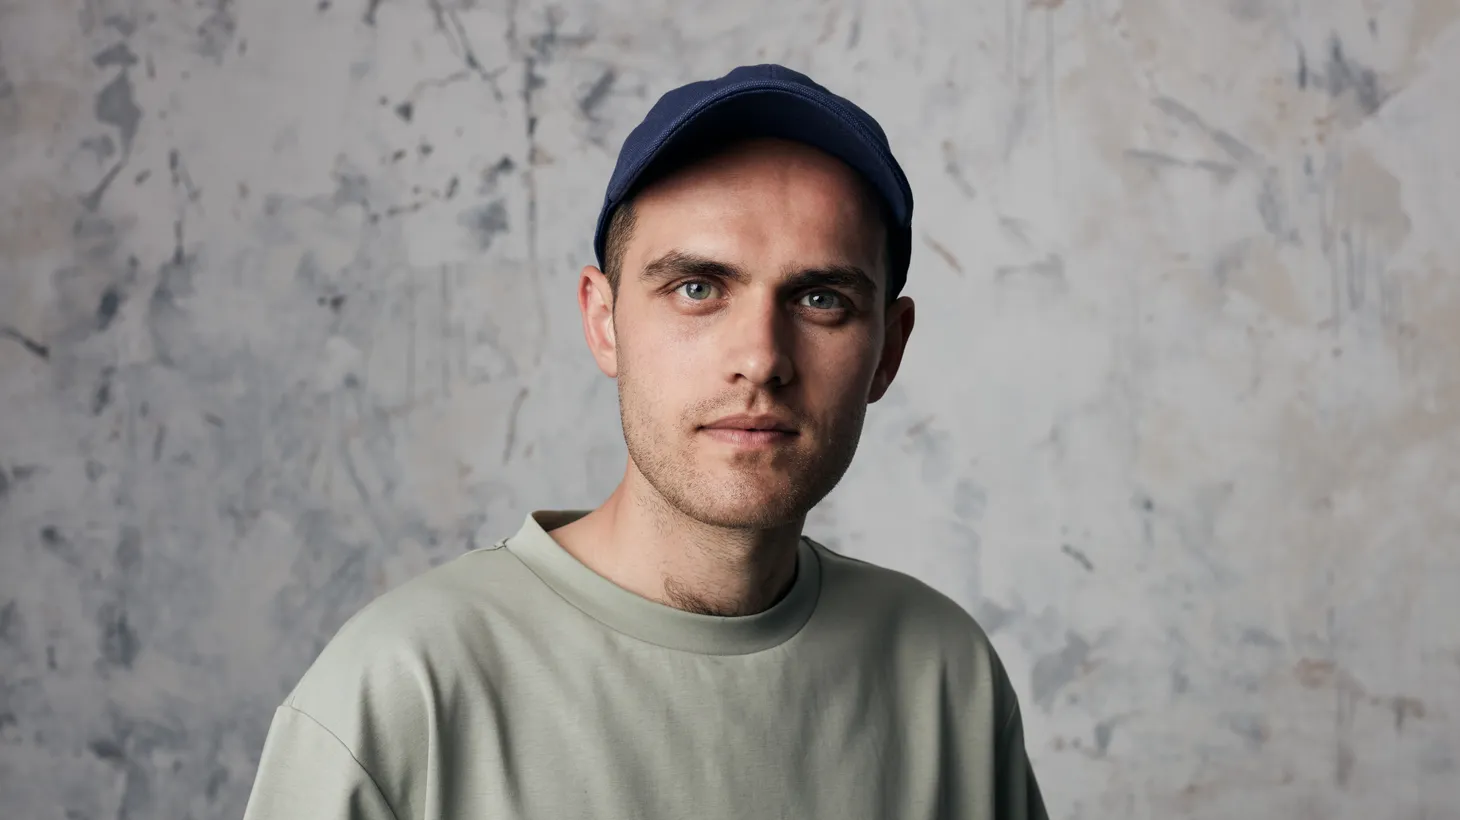 Ferociously talented polymath Jordan Rakei shares a brand new fourtrack EP. The title track “Bruises” reaches back to the singer’s love of Bob Marley while teaming up with Amika Quartet on strings.